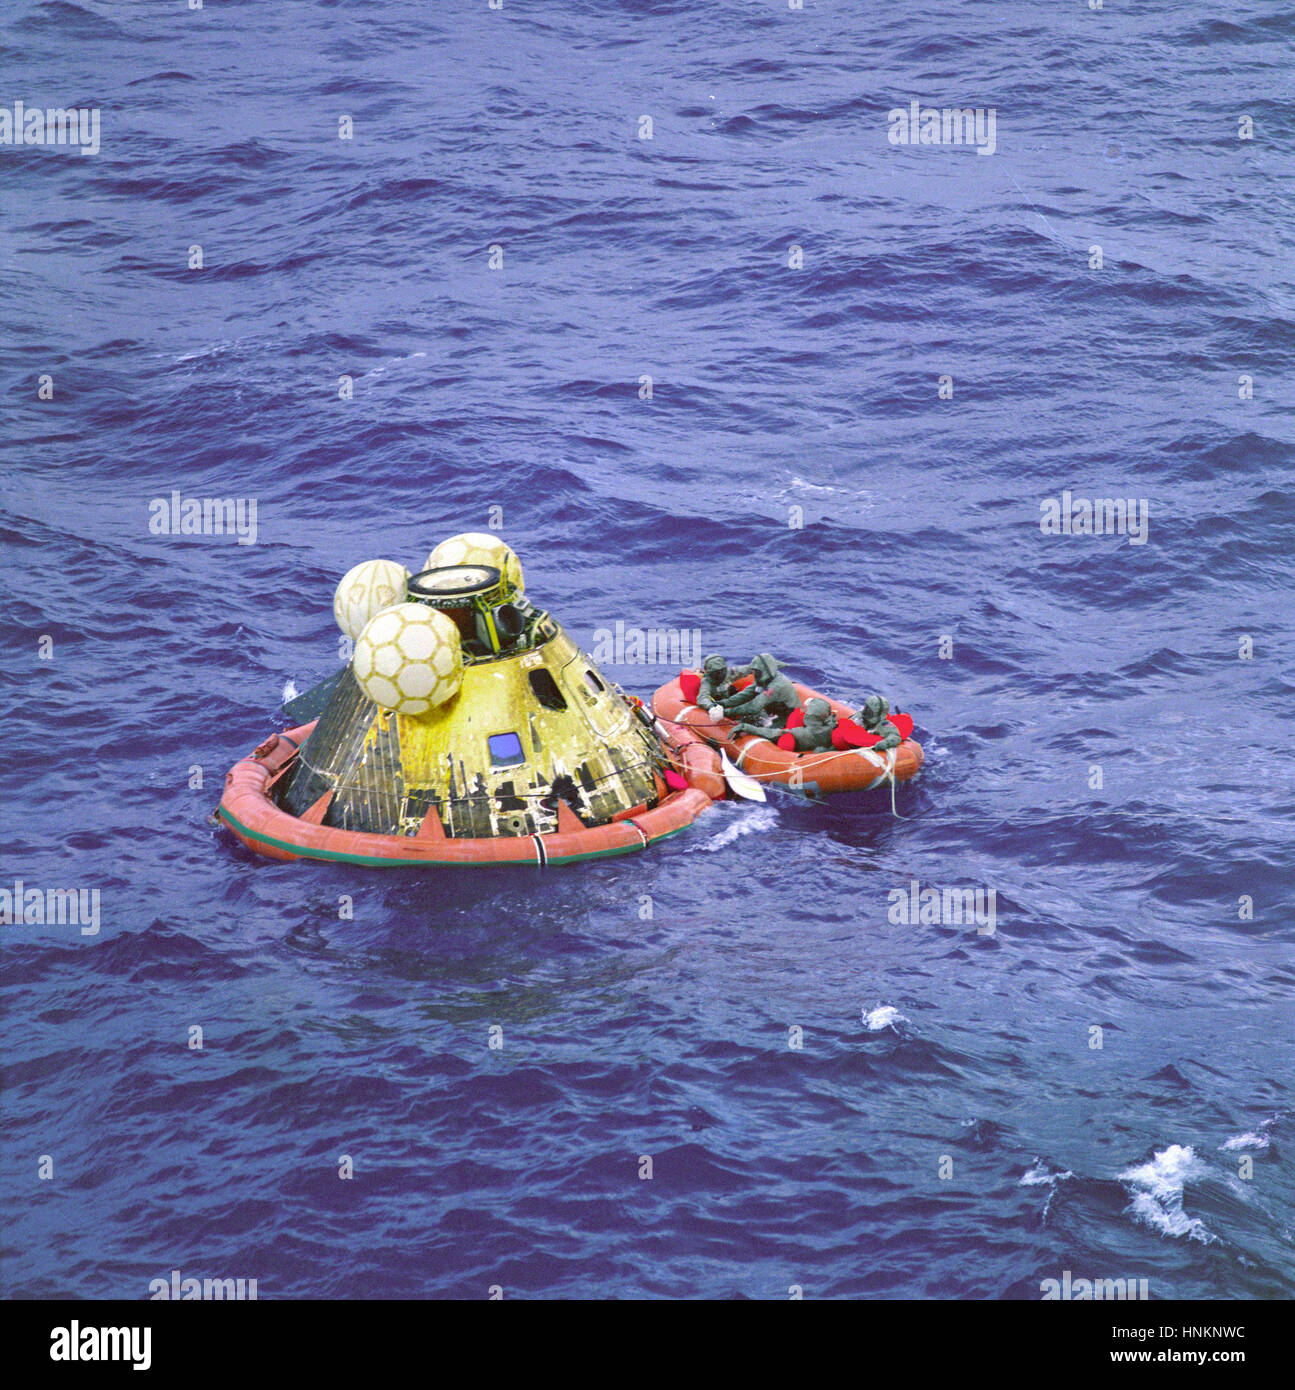 The Apollo 11 crew await pickup by a helicopter from the USS Hornet, prime recovery ship for the historic lunar landing mission. The fourth man in the life raft is a United States Navy underwater demolition team swimmer. All four men are wearing biological isolation garments.  The Apollo 11 Command Module Columbia with astronauts Neil Armstrong, Michael Collins, and Buzz Aldrin aboard splashed down at 11:49 a.m. CDT, July 24, 1969, about 812 nautical miles southwest of Hawaii and only 12 nautical miles from the USS Hornet.  Image Credit: NASA Stock Photo